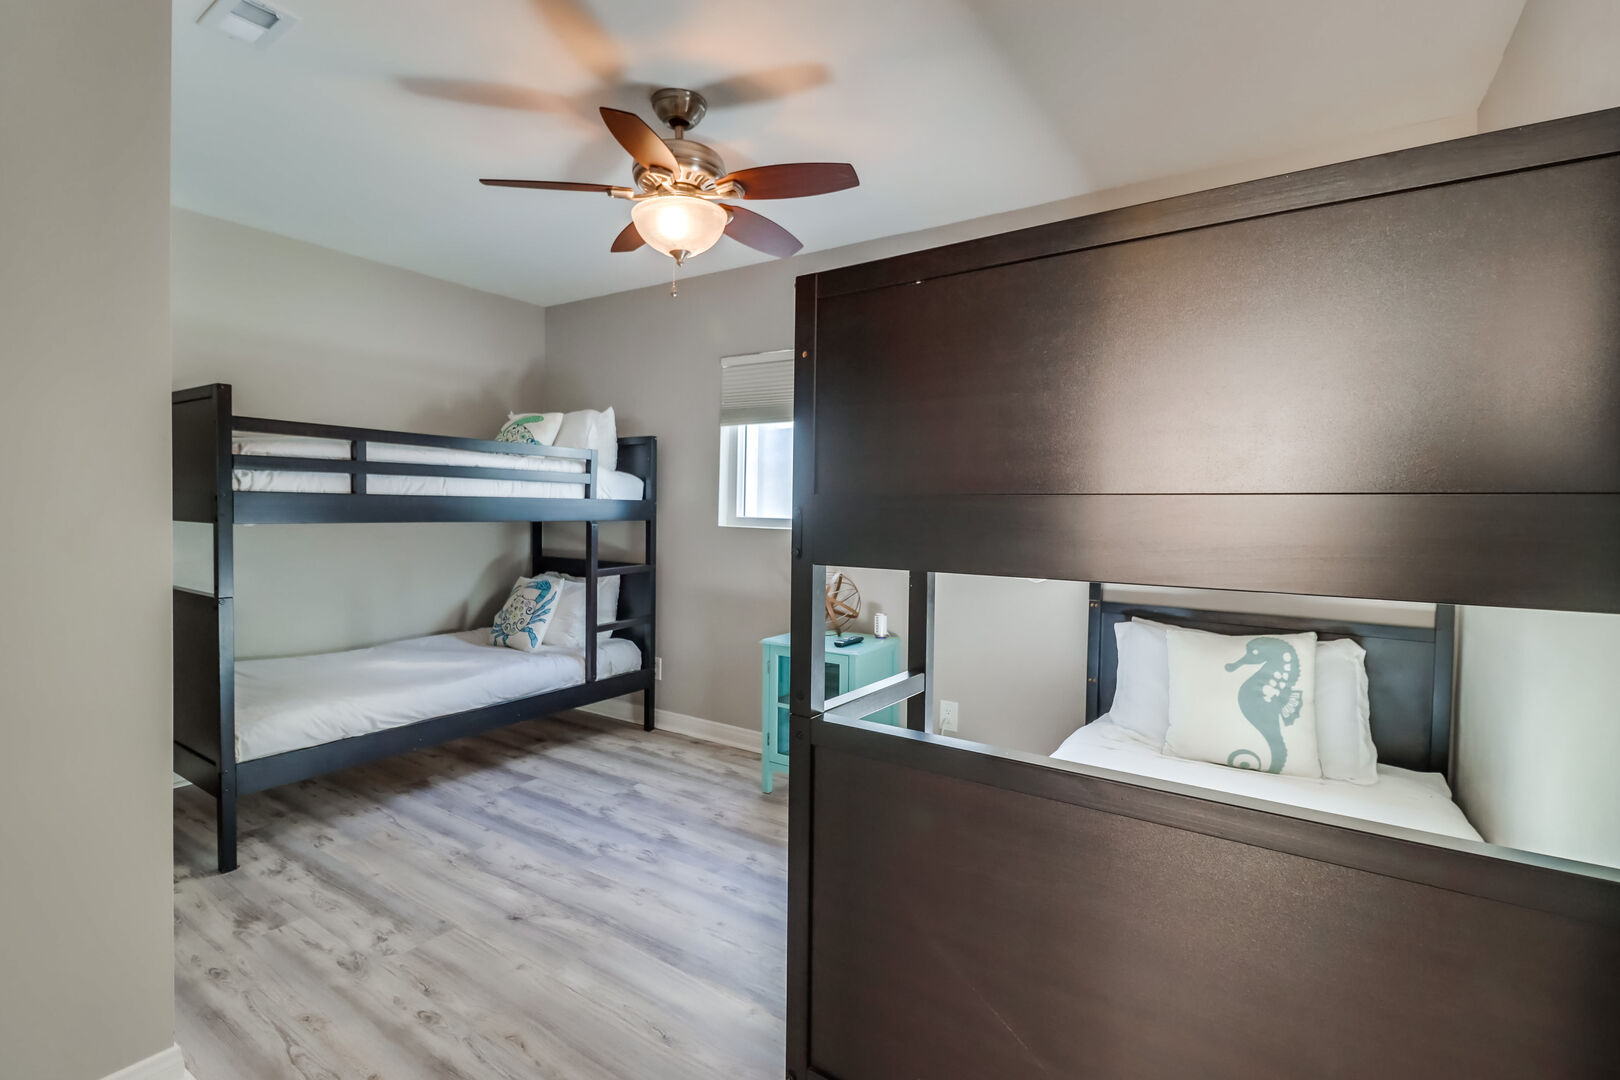 Second guest room on the second level with 2 sets of bunk beds with twin mattresses. Also includes a closet, smart TV and ceiling fan